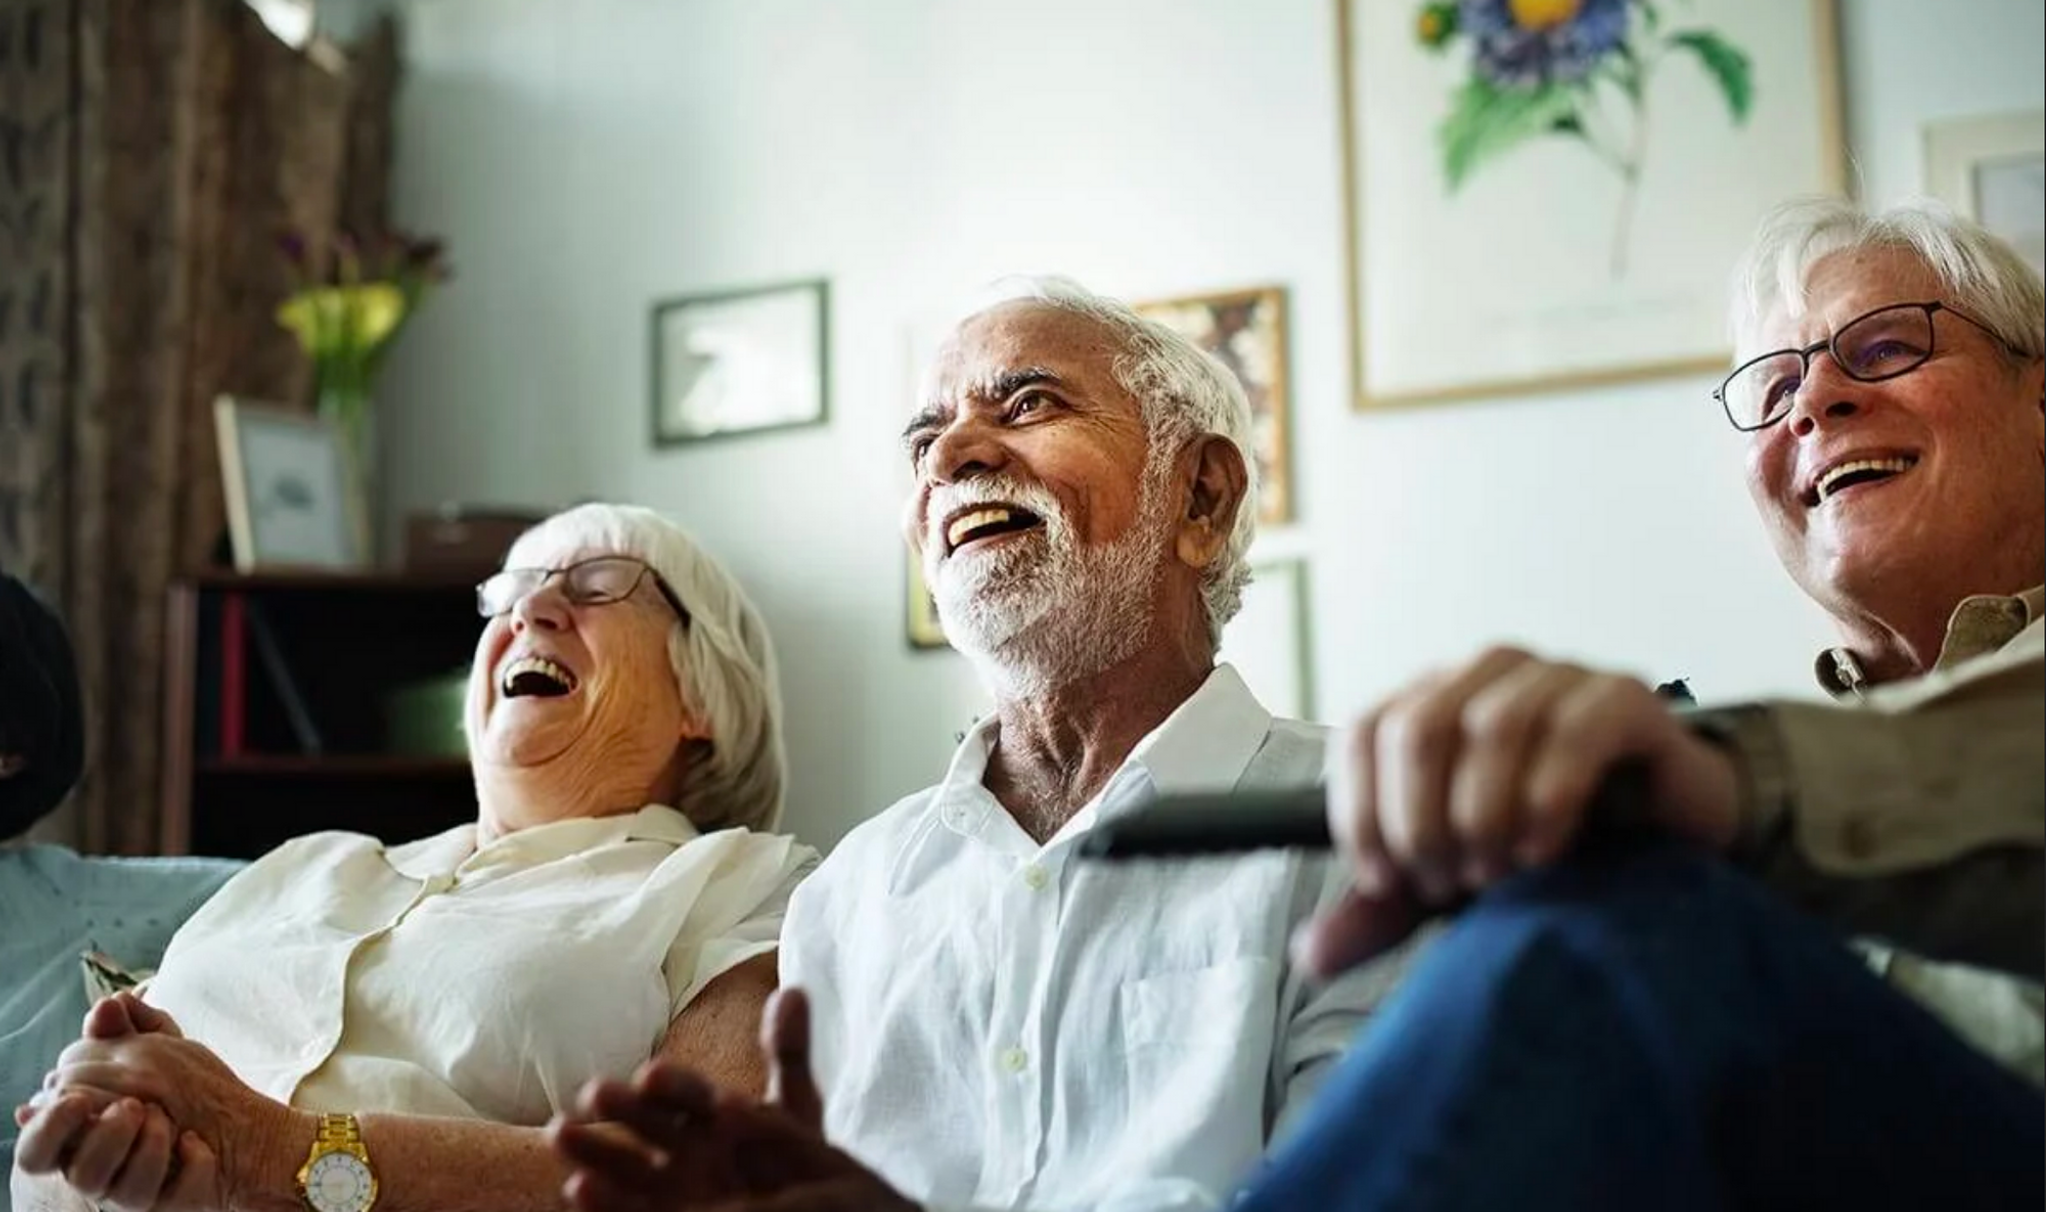 a group of older adults sitting together and laughing